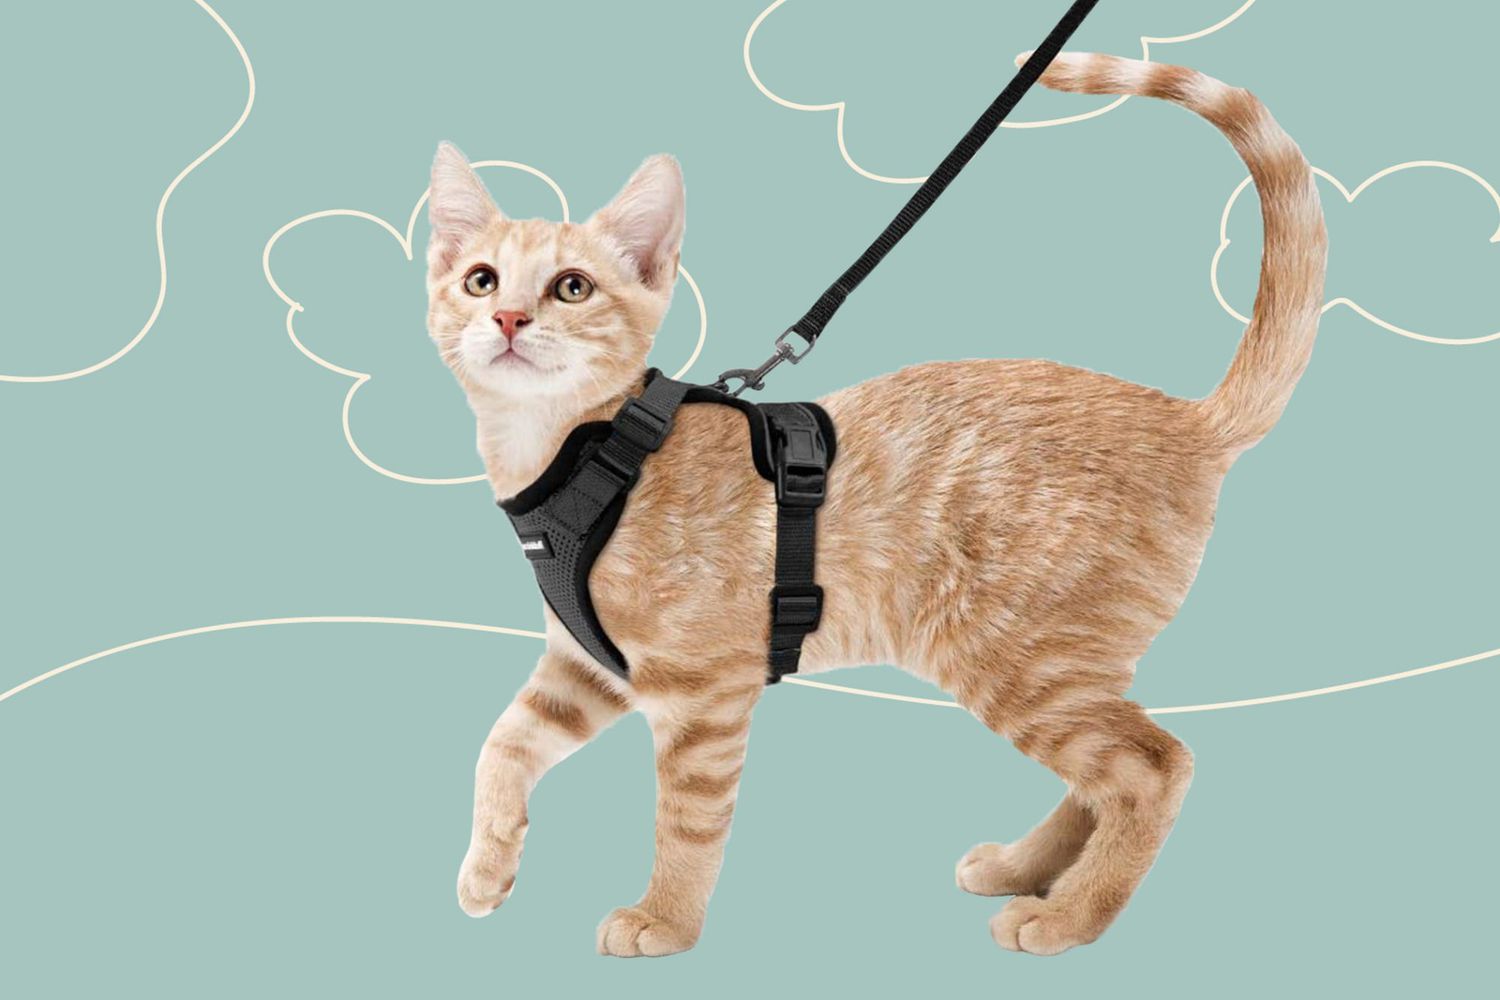 Cat Harness and Lead Set Vest Chest Strap Adjustable Soft Harnesses Nylon Strap with Fashion Style Design Escape Proof for Walking Outdoor Kittens Puppies Cats Black